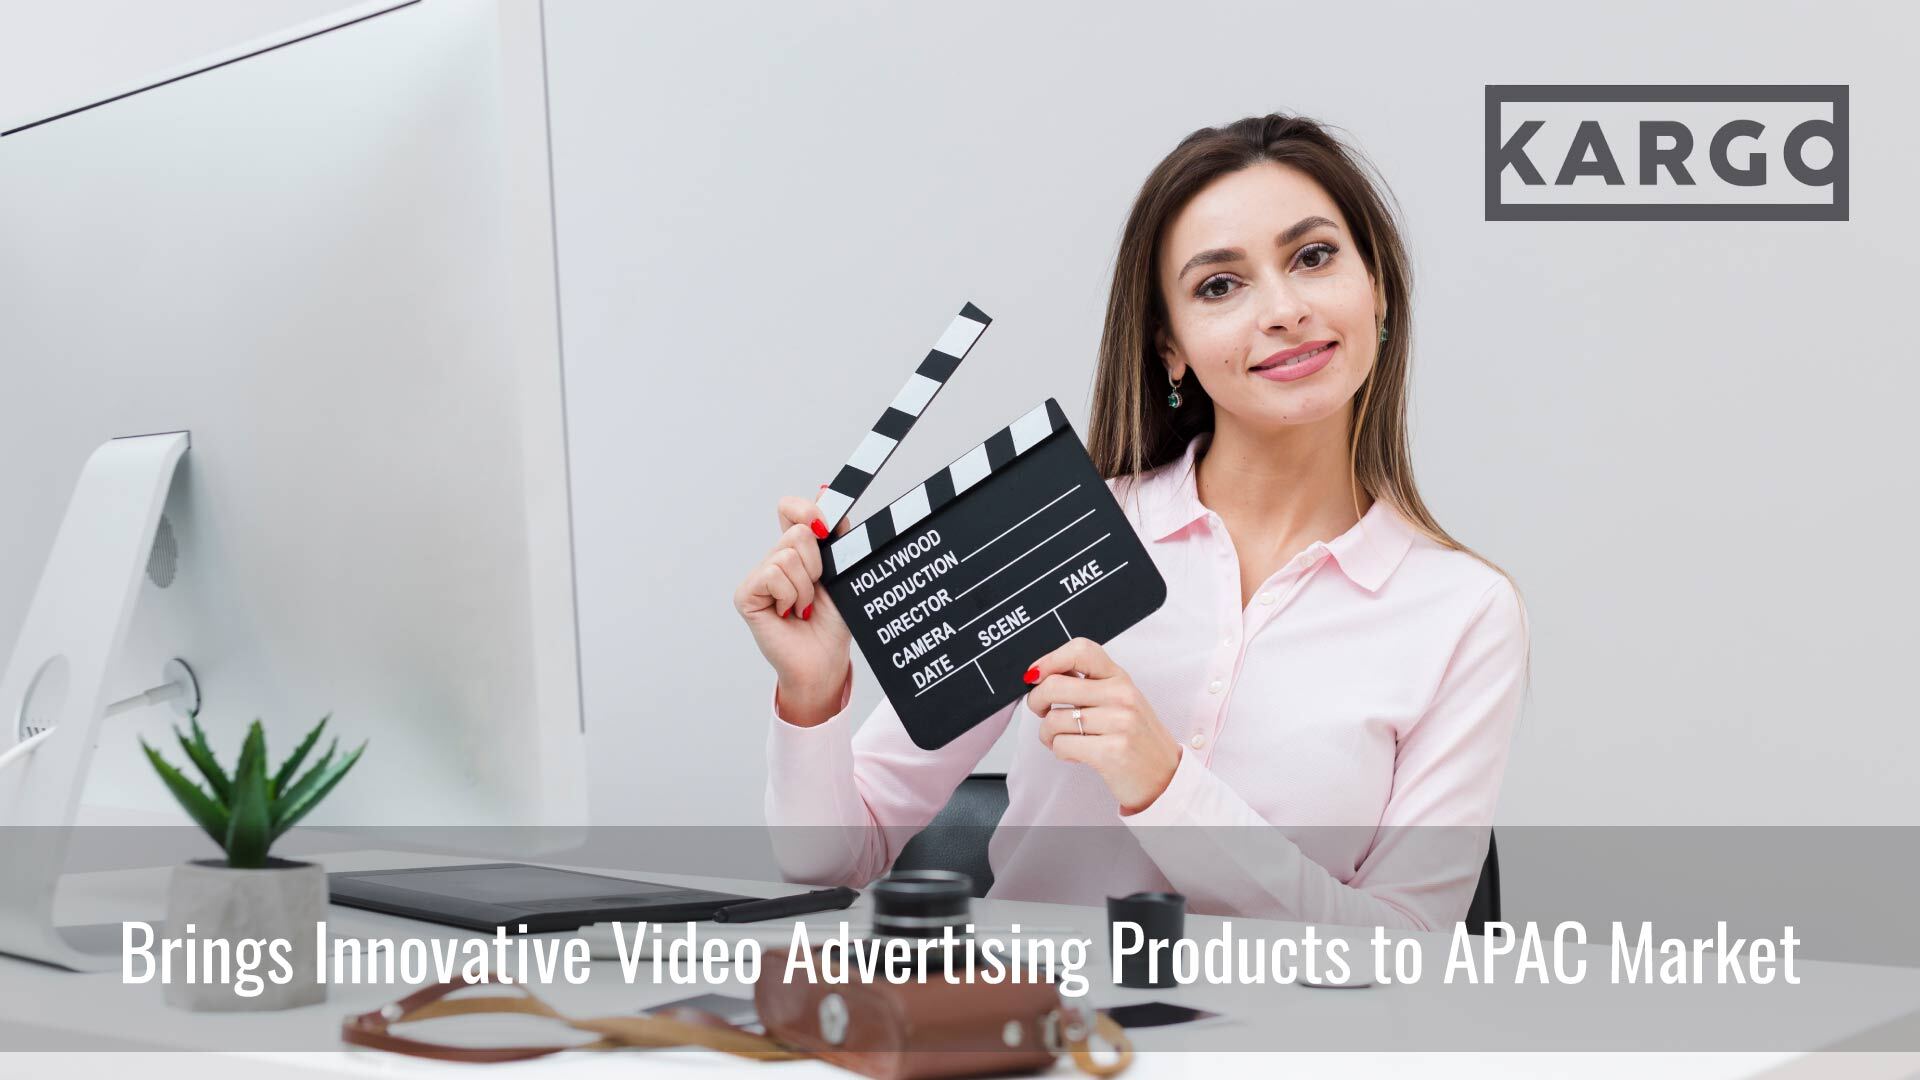 Kargo Brings Innovative Video Advertising Products to APAC Market